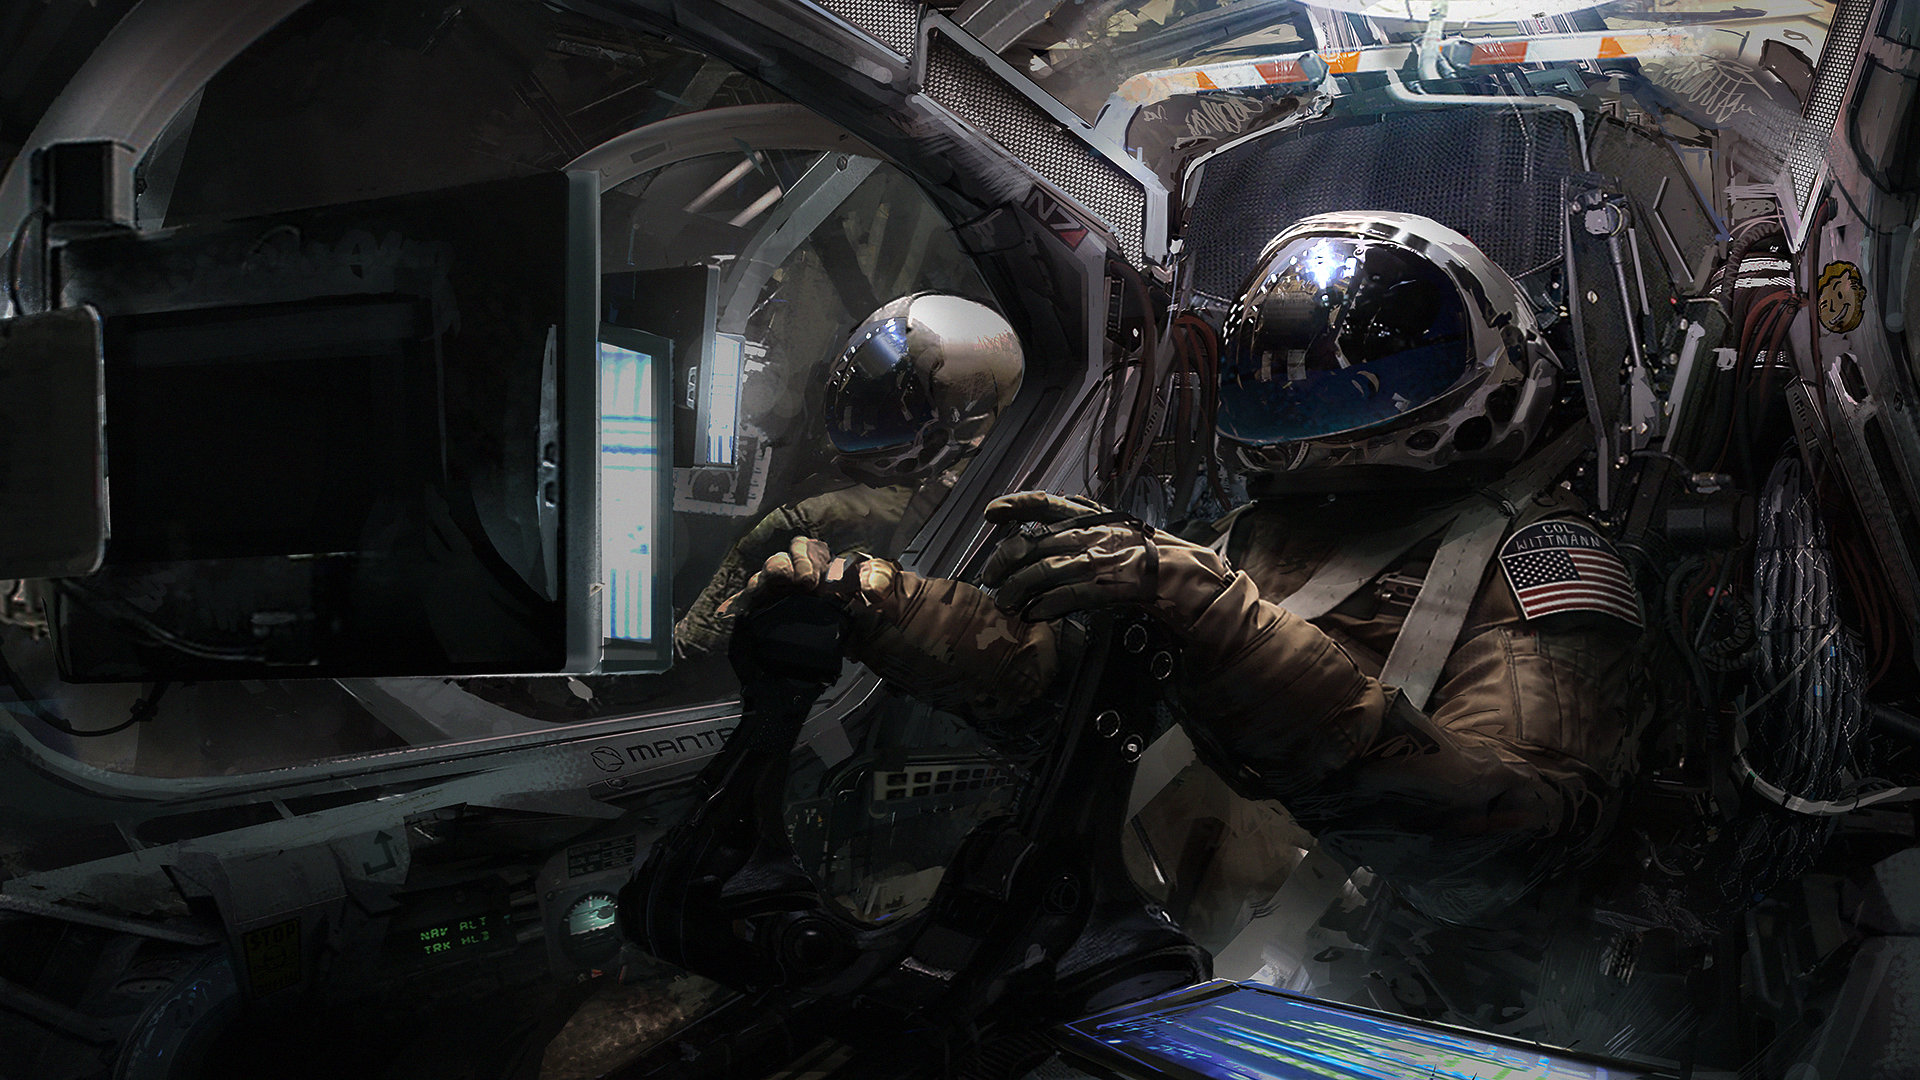 Manta Project by Klaus Wittmann